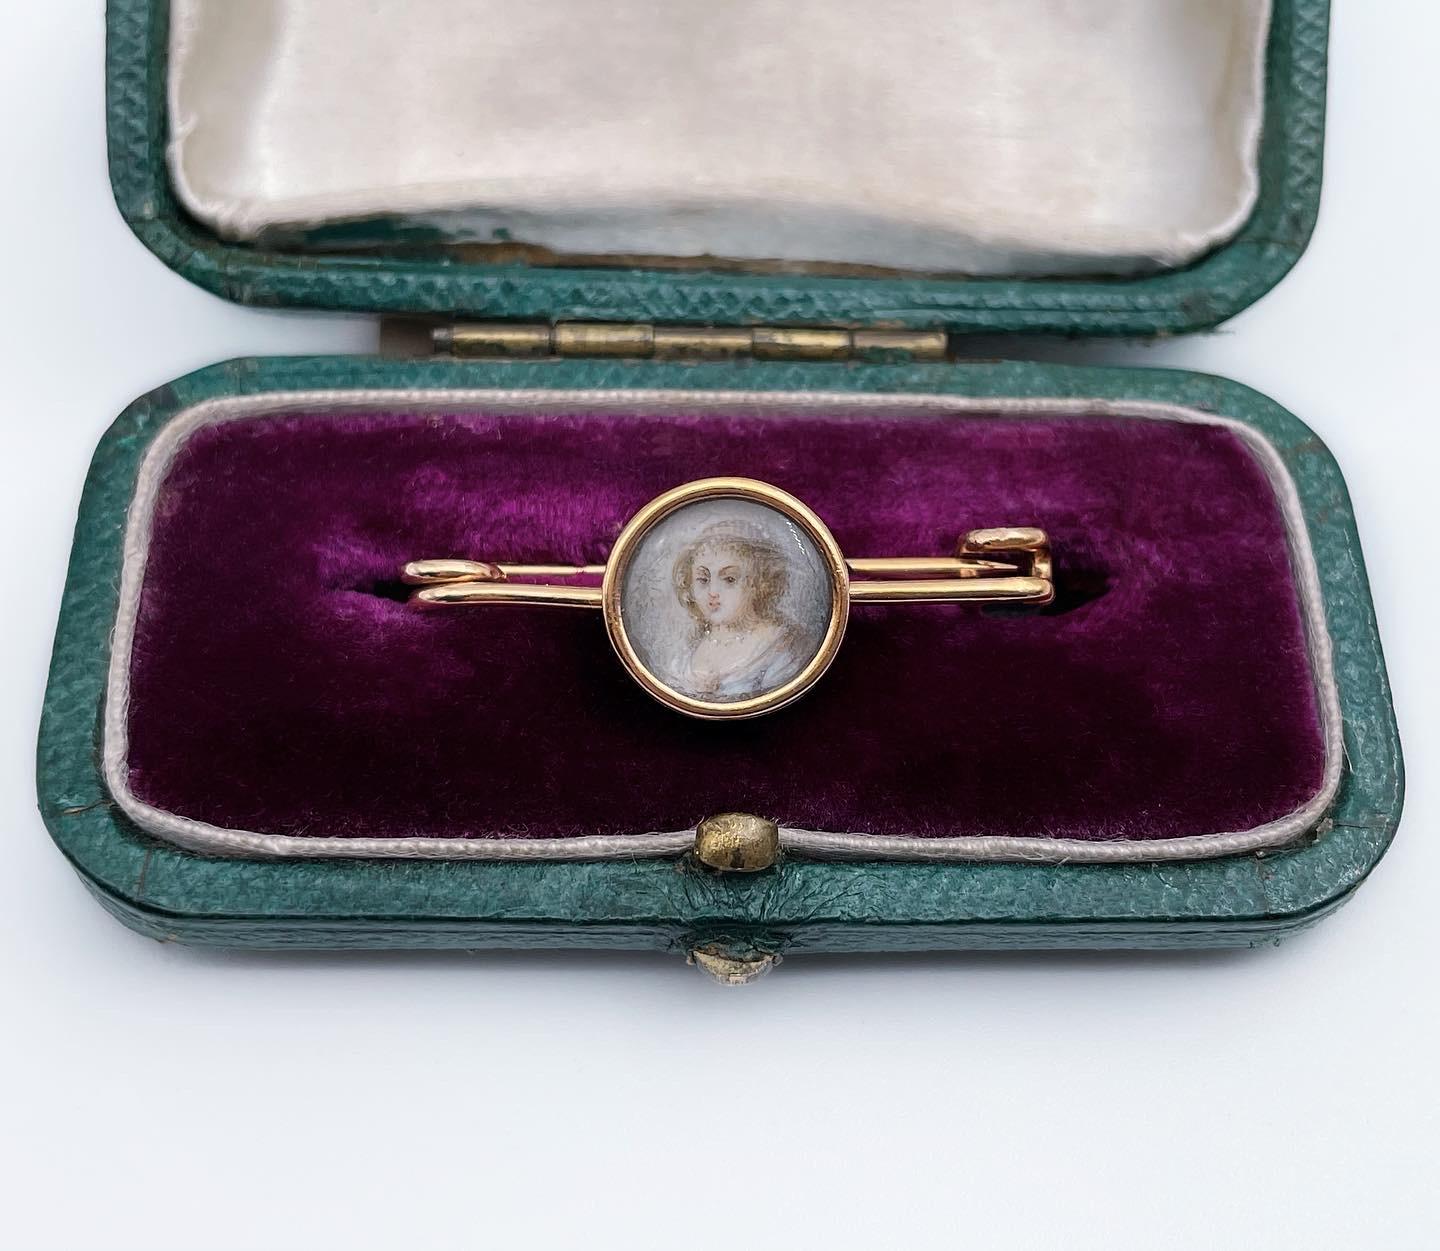 This is a delicate bar brooch dating from 19th century Victorian period. The piece is crafted in 18K yellow gold. It features a hand painted miniature portrait, depicting a lady. The picture is small and highly detailed.

The brooch has a safe